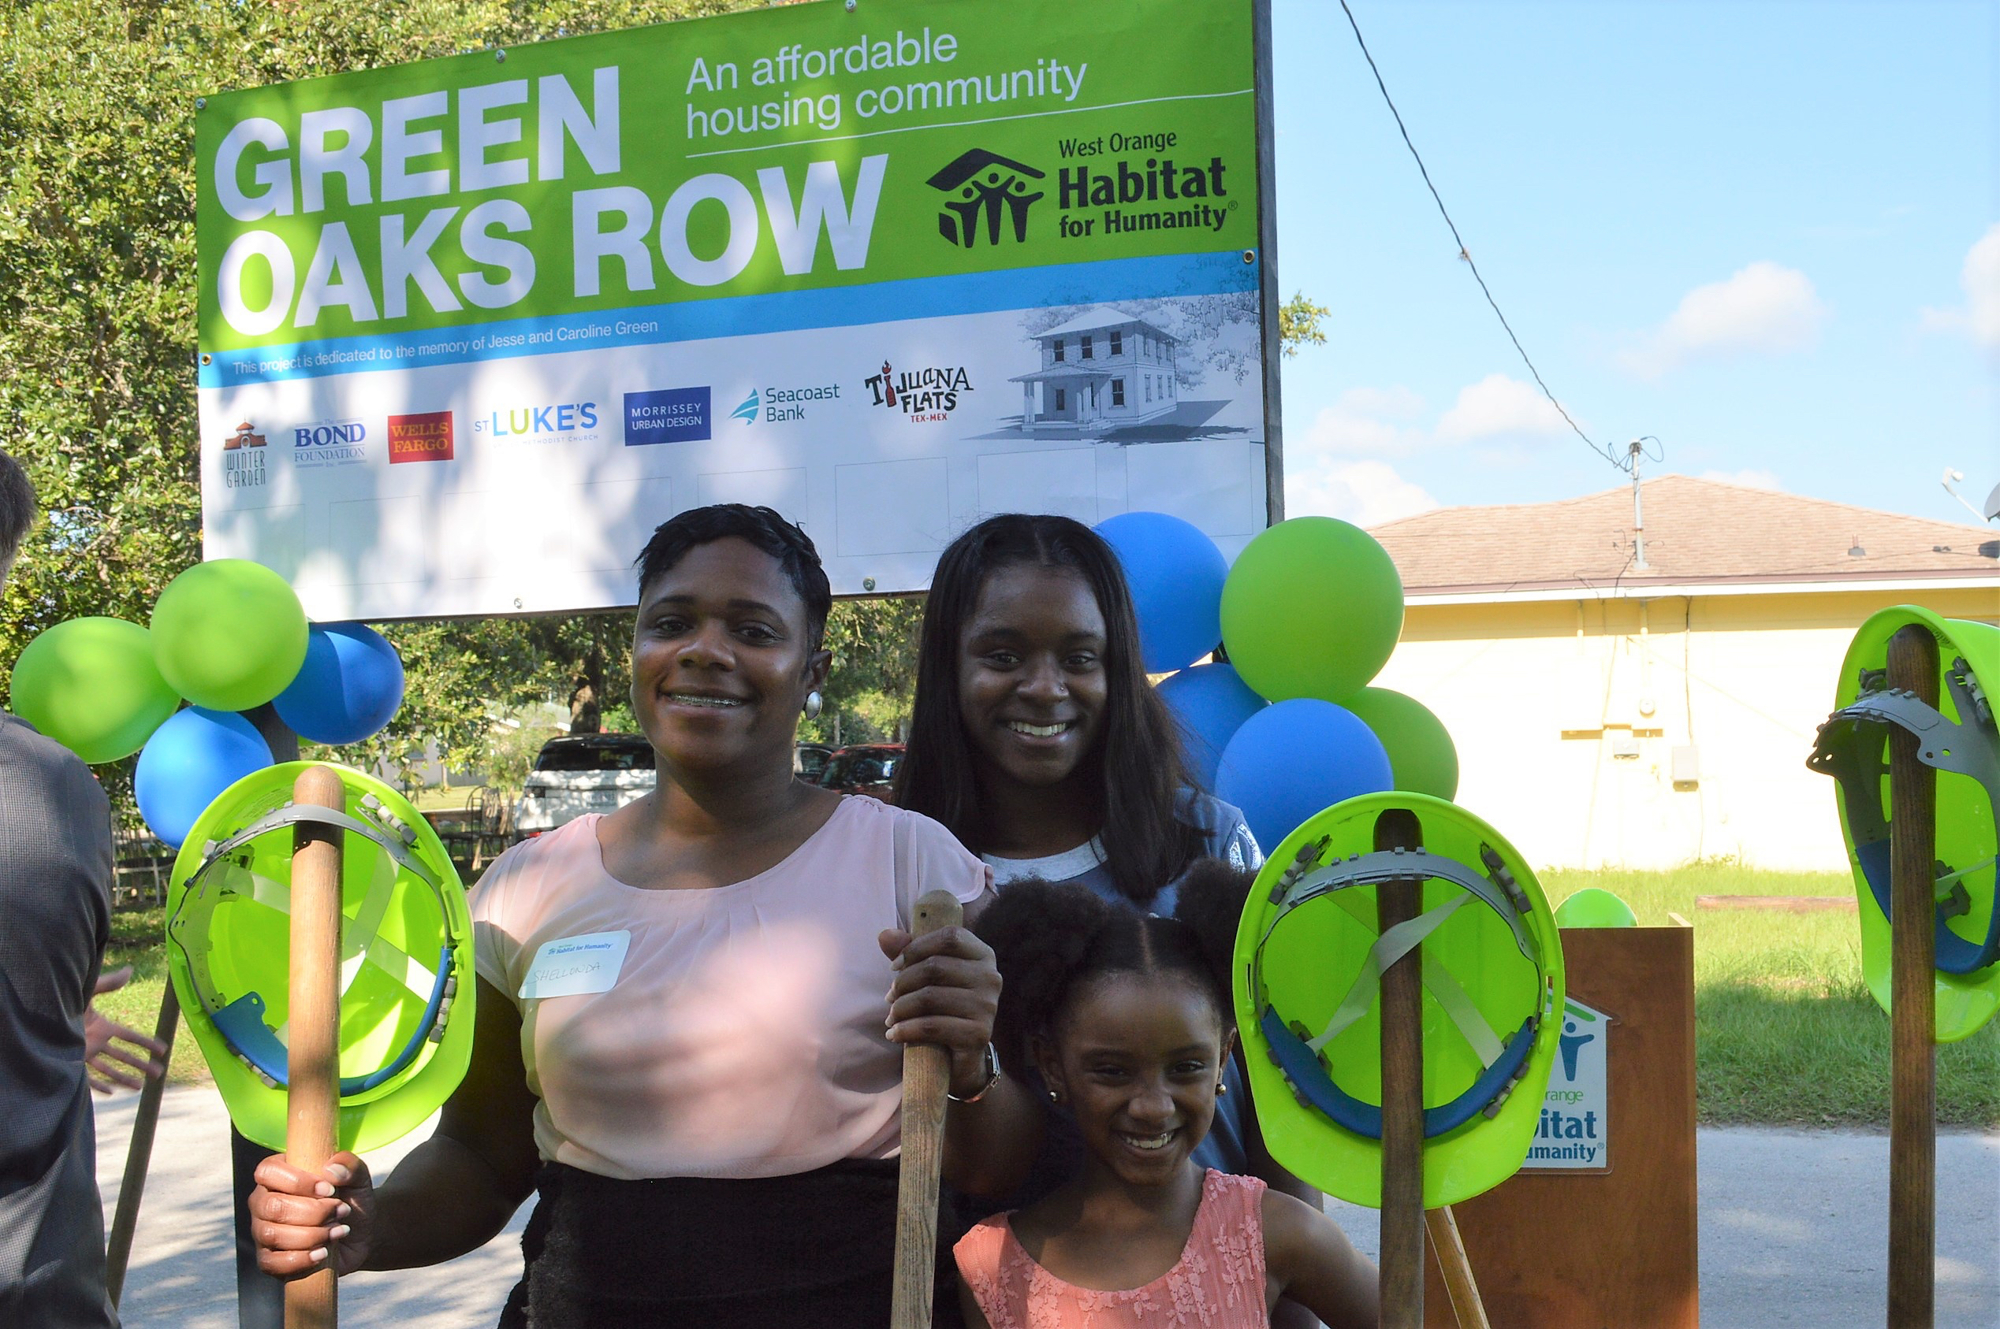 Shellonda Hill, pictured here with her two daughters, is a recipient of one of the Green Oaks Row homes in Winter Garden.